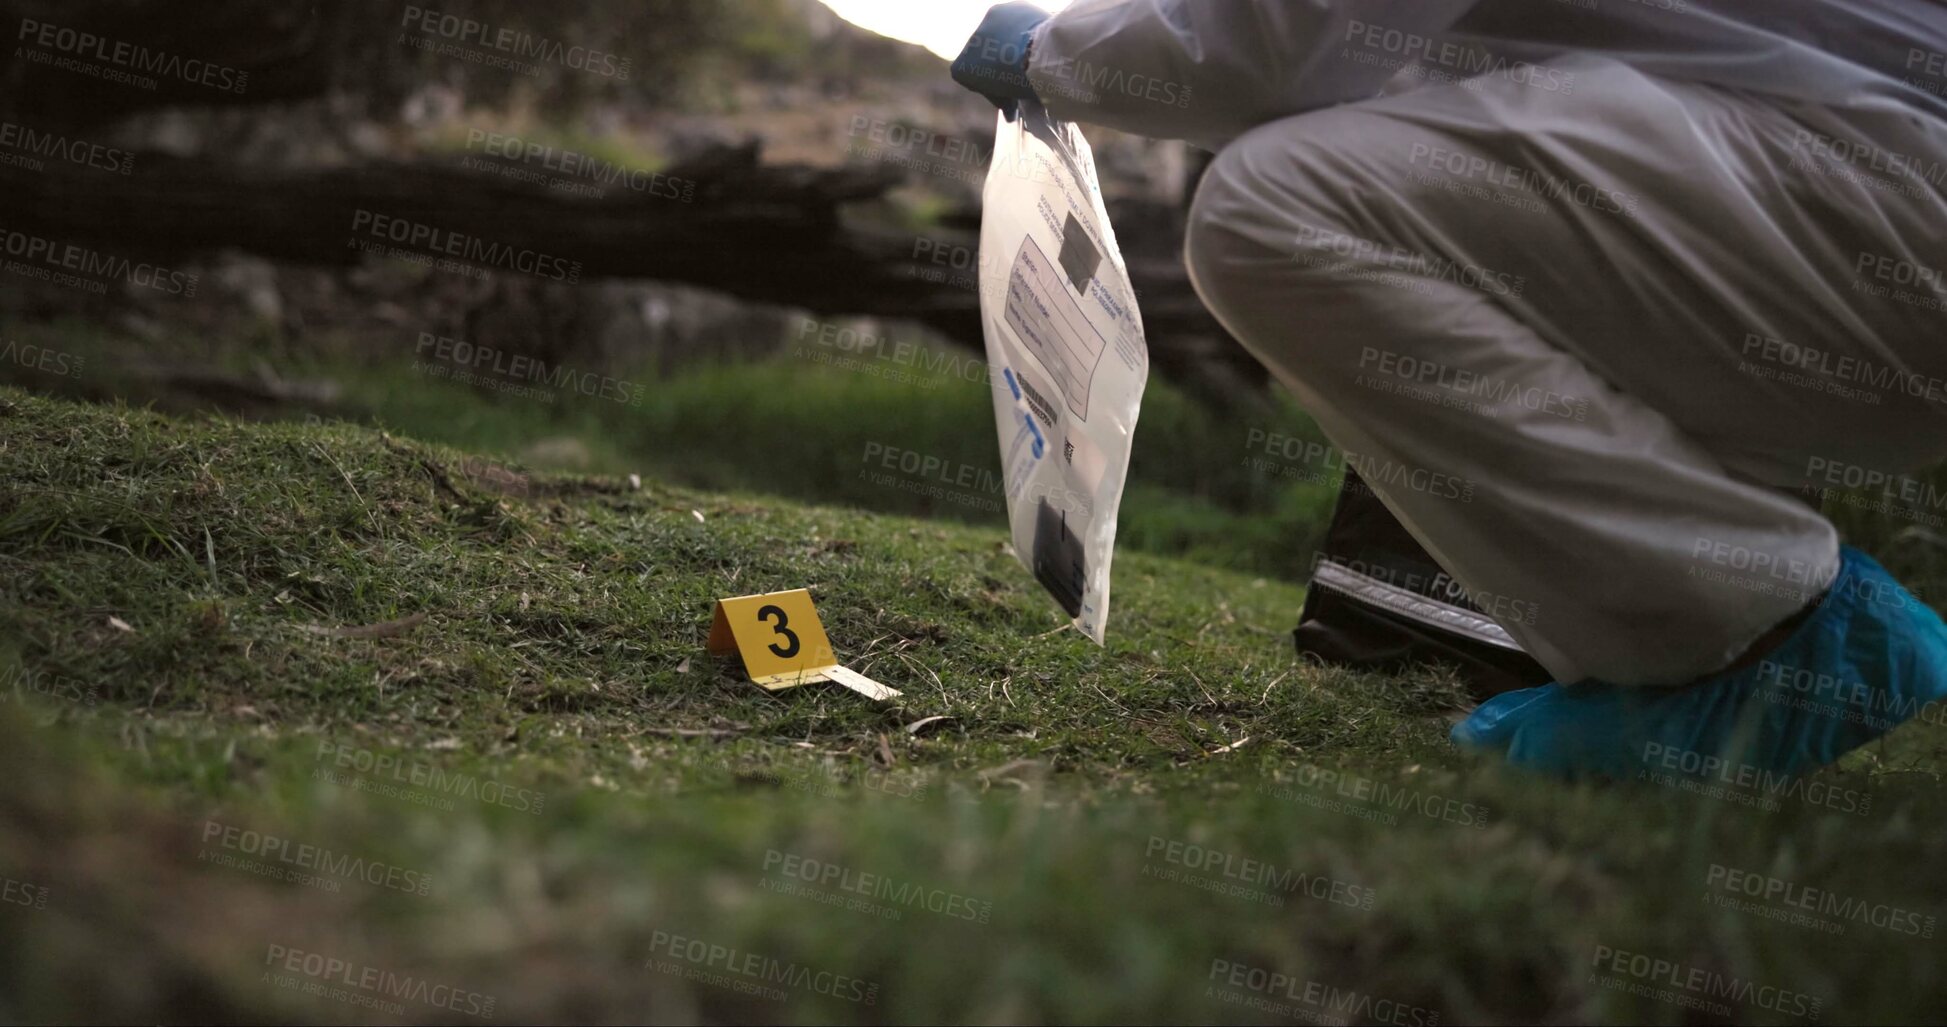 Buy stock photo Csi, collect or evidence at crime scene for investigation in forest with safety bag or protection hazmat.
Forensic career, expert investigator and examination for observation or case research outdoor